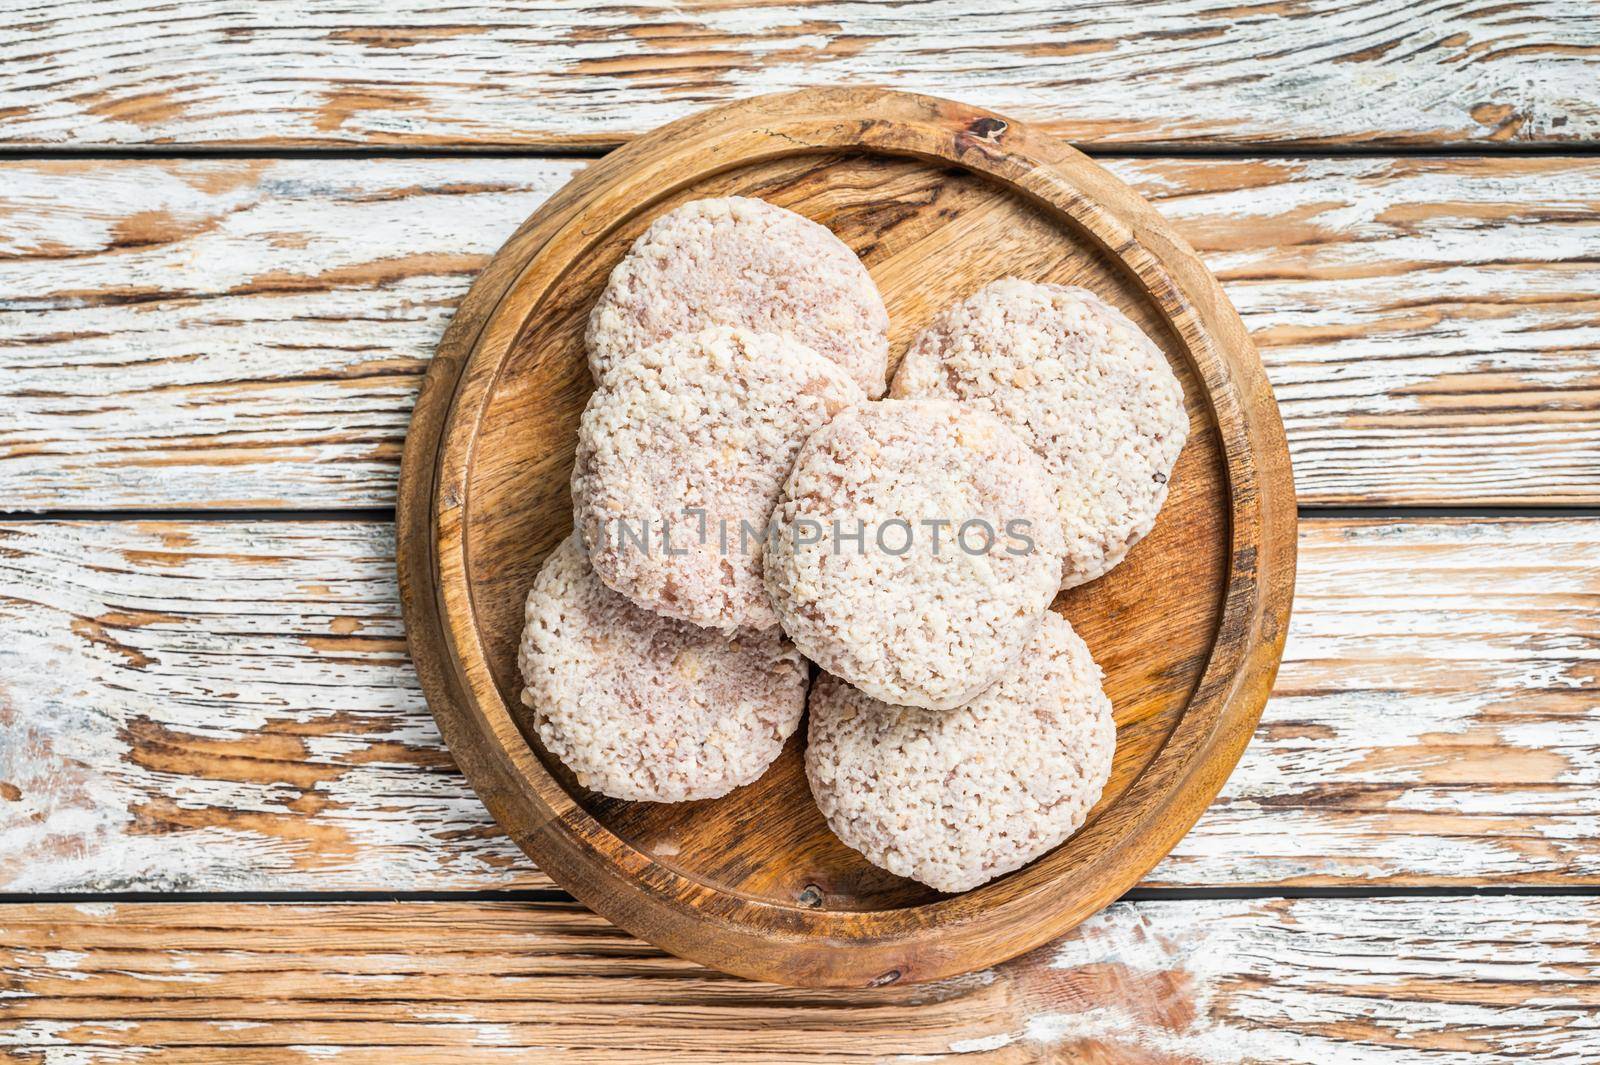 Raw chicken patty cutlet with breadcrumbs. White wooden background. Top view by Composter